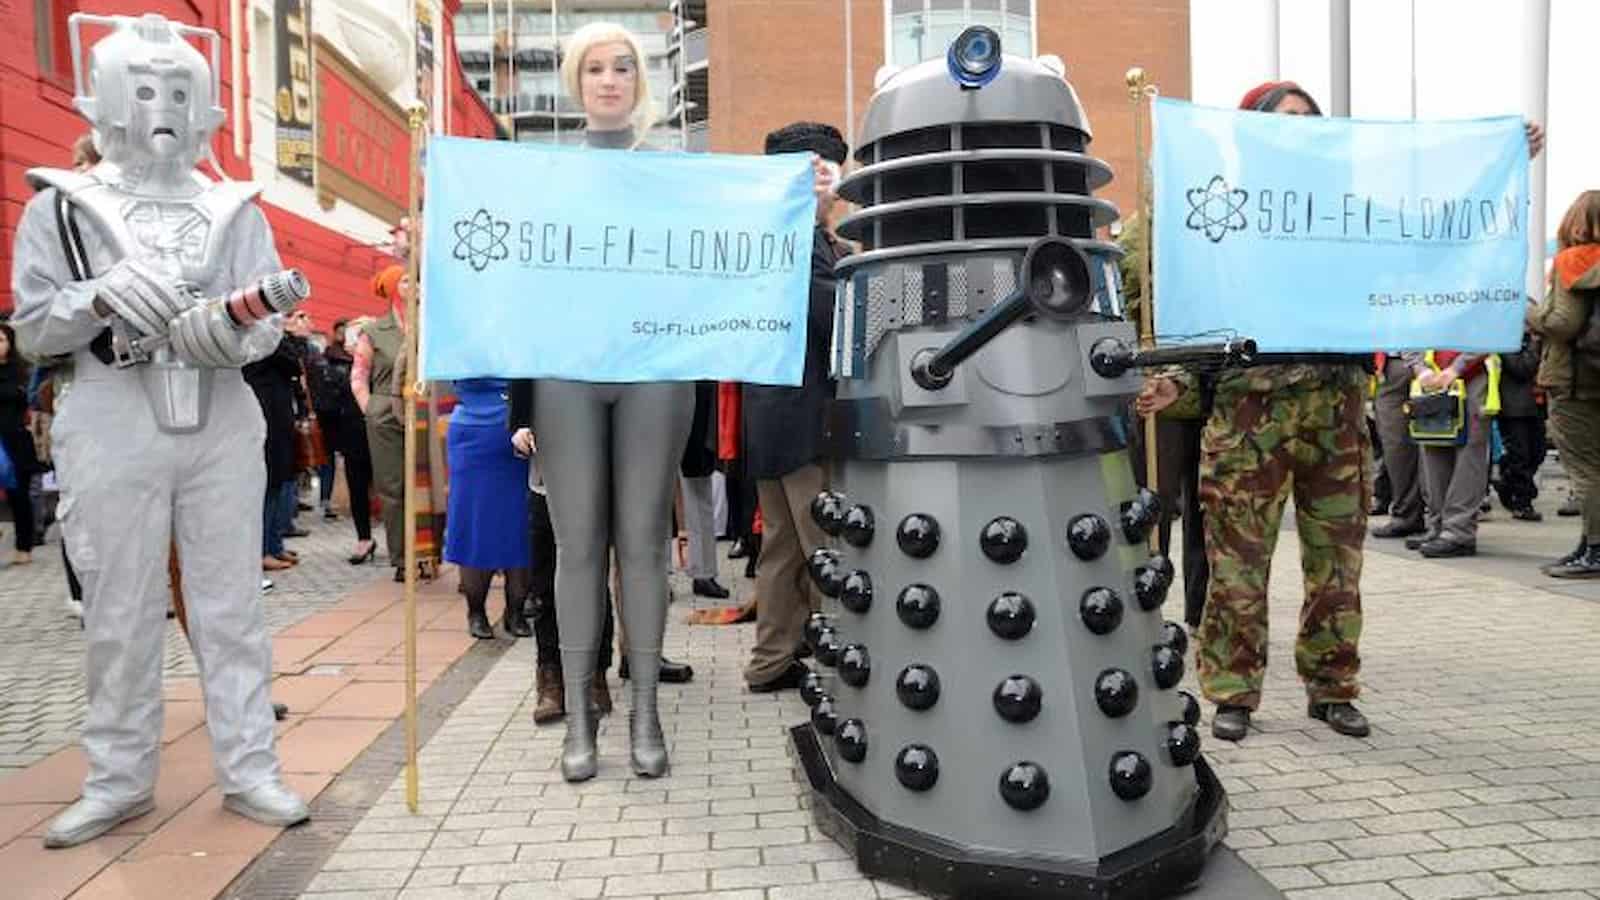 Dalek Remembrance Day 2023: Date, History and Five Fascinating Facts about the Daleks